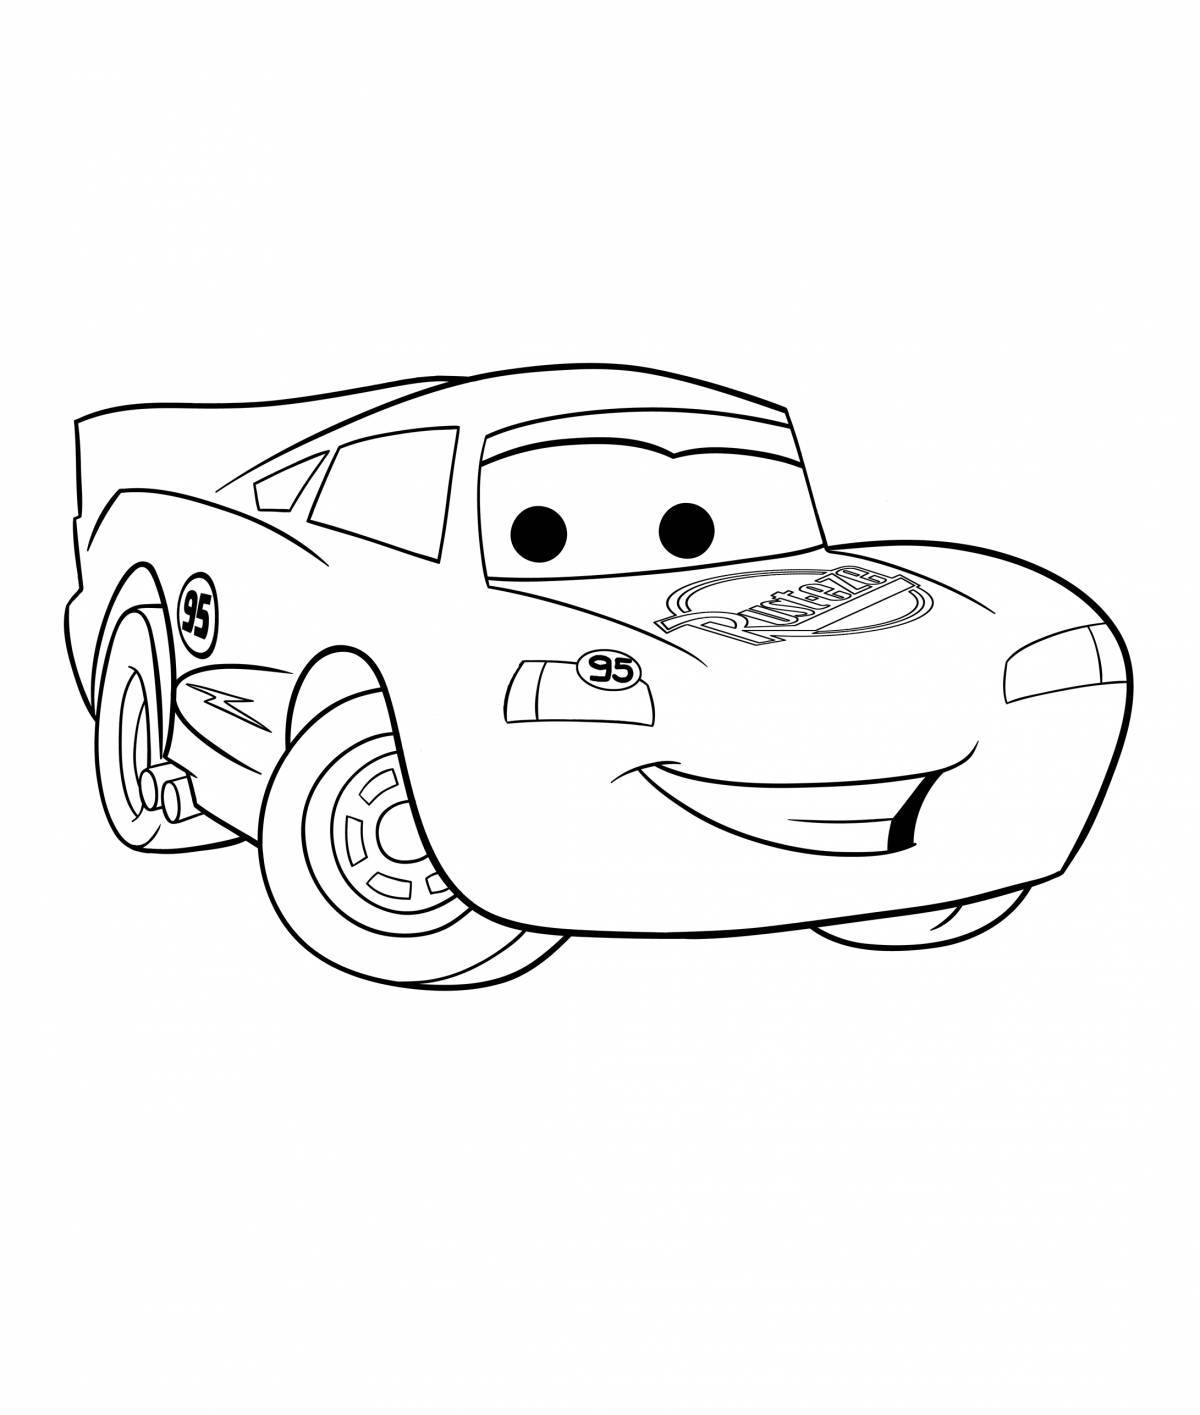 Coloring page amazing mcqueen